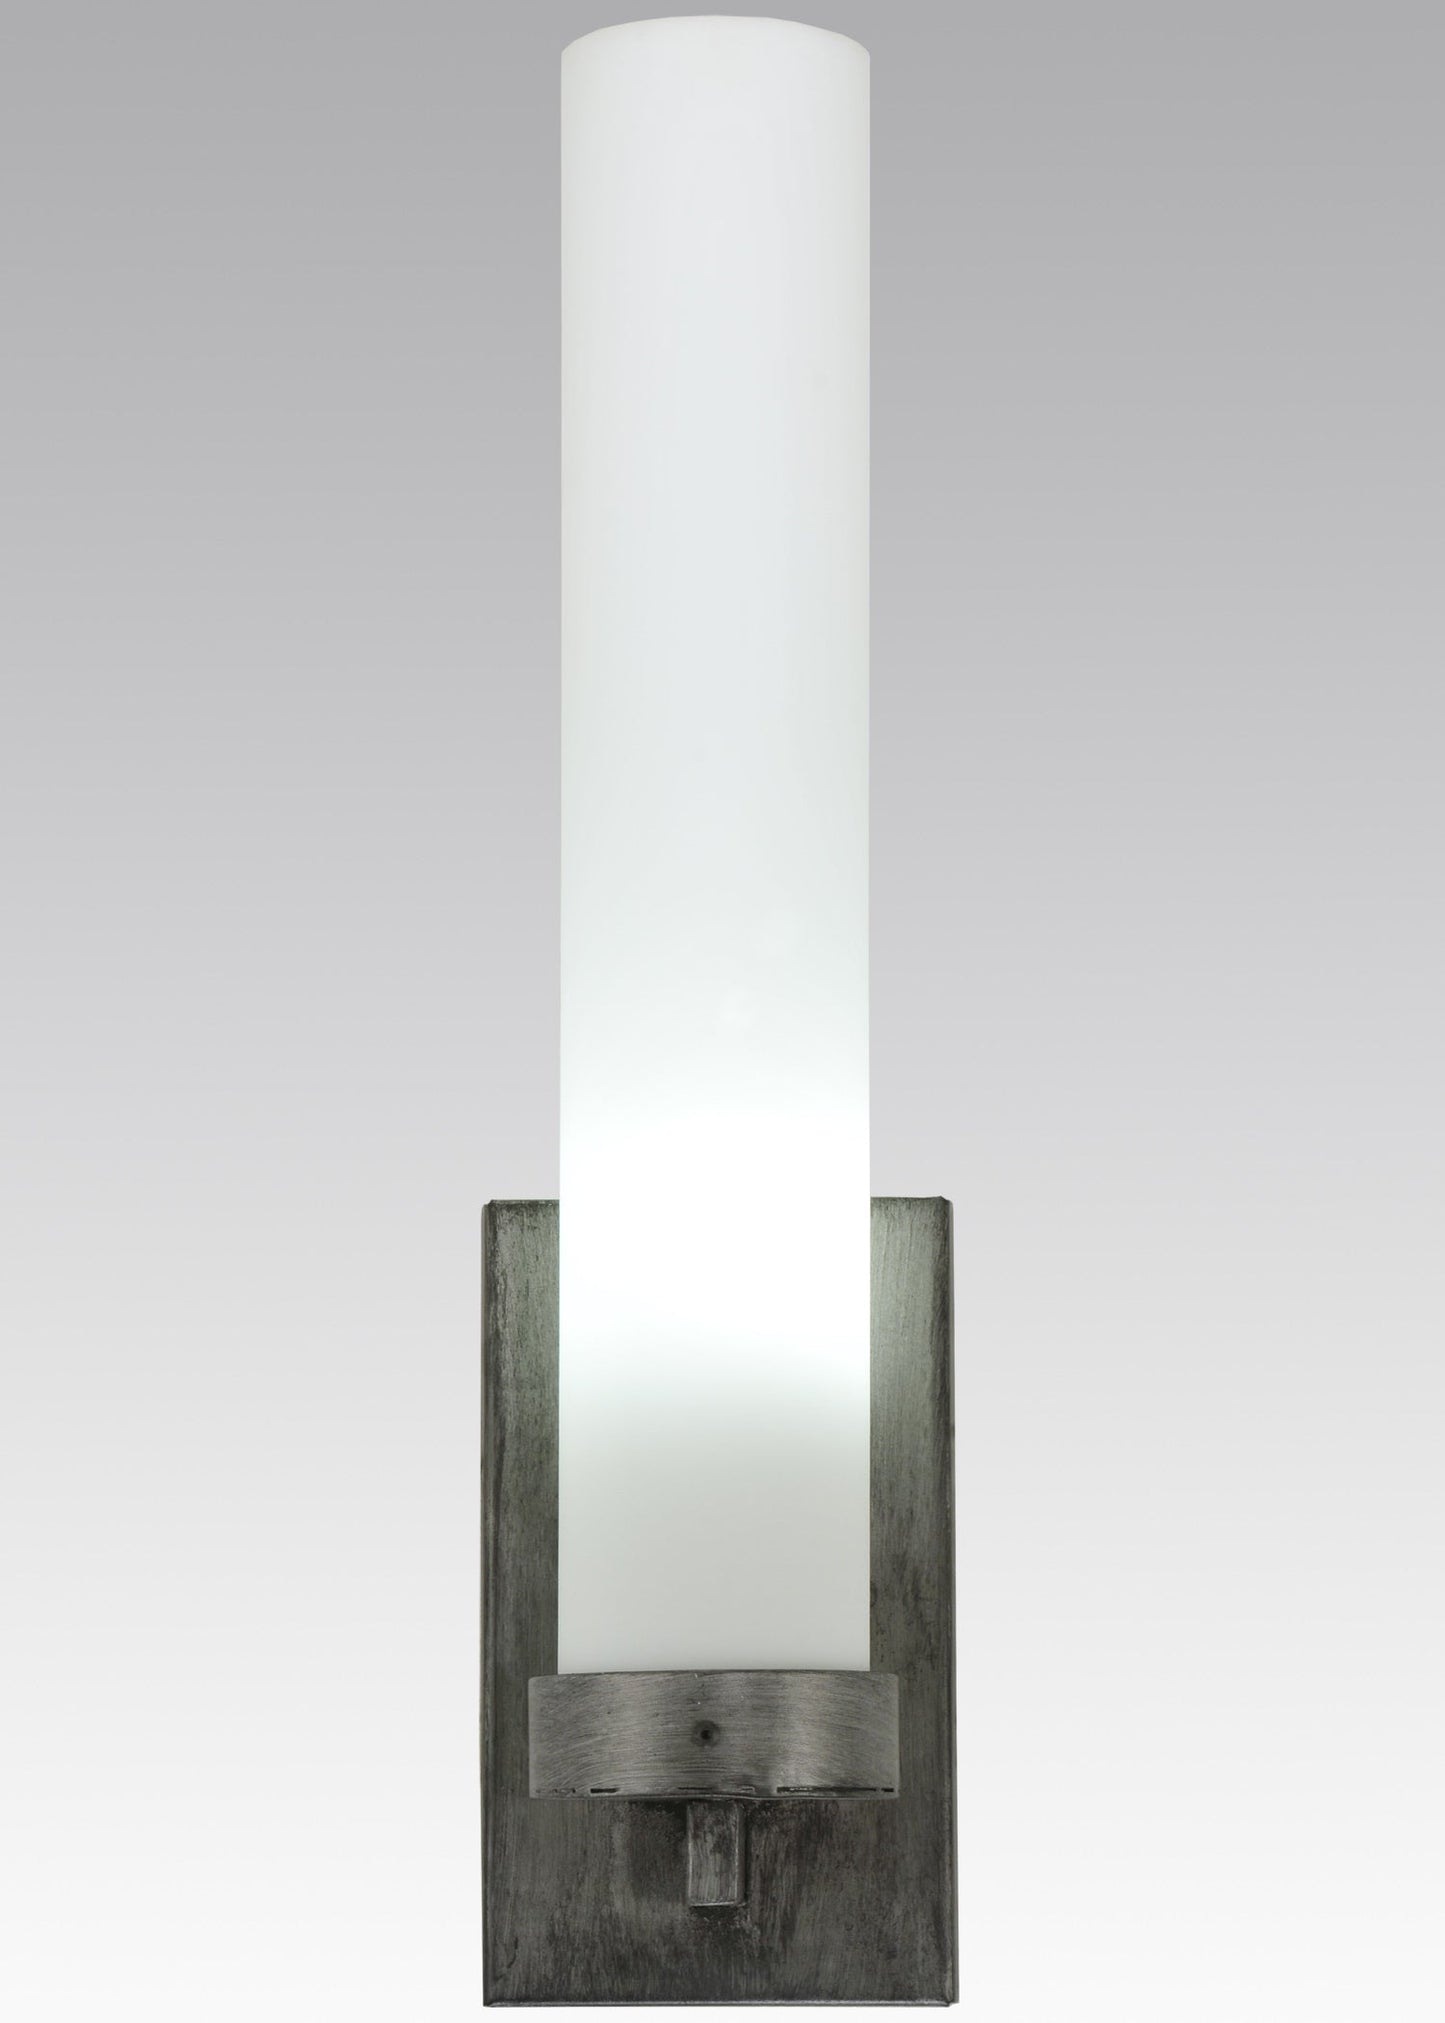 4.5" Farmington Wall Sconce by 2nd Ave Lighting